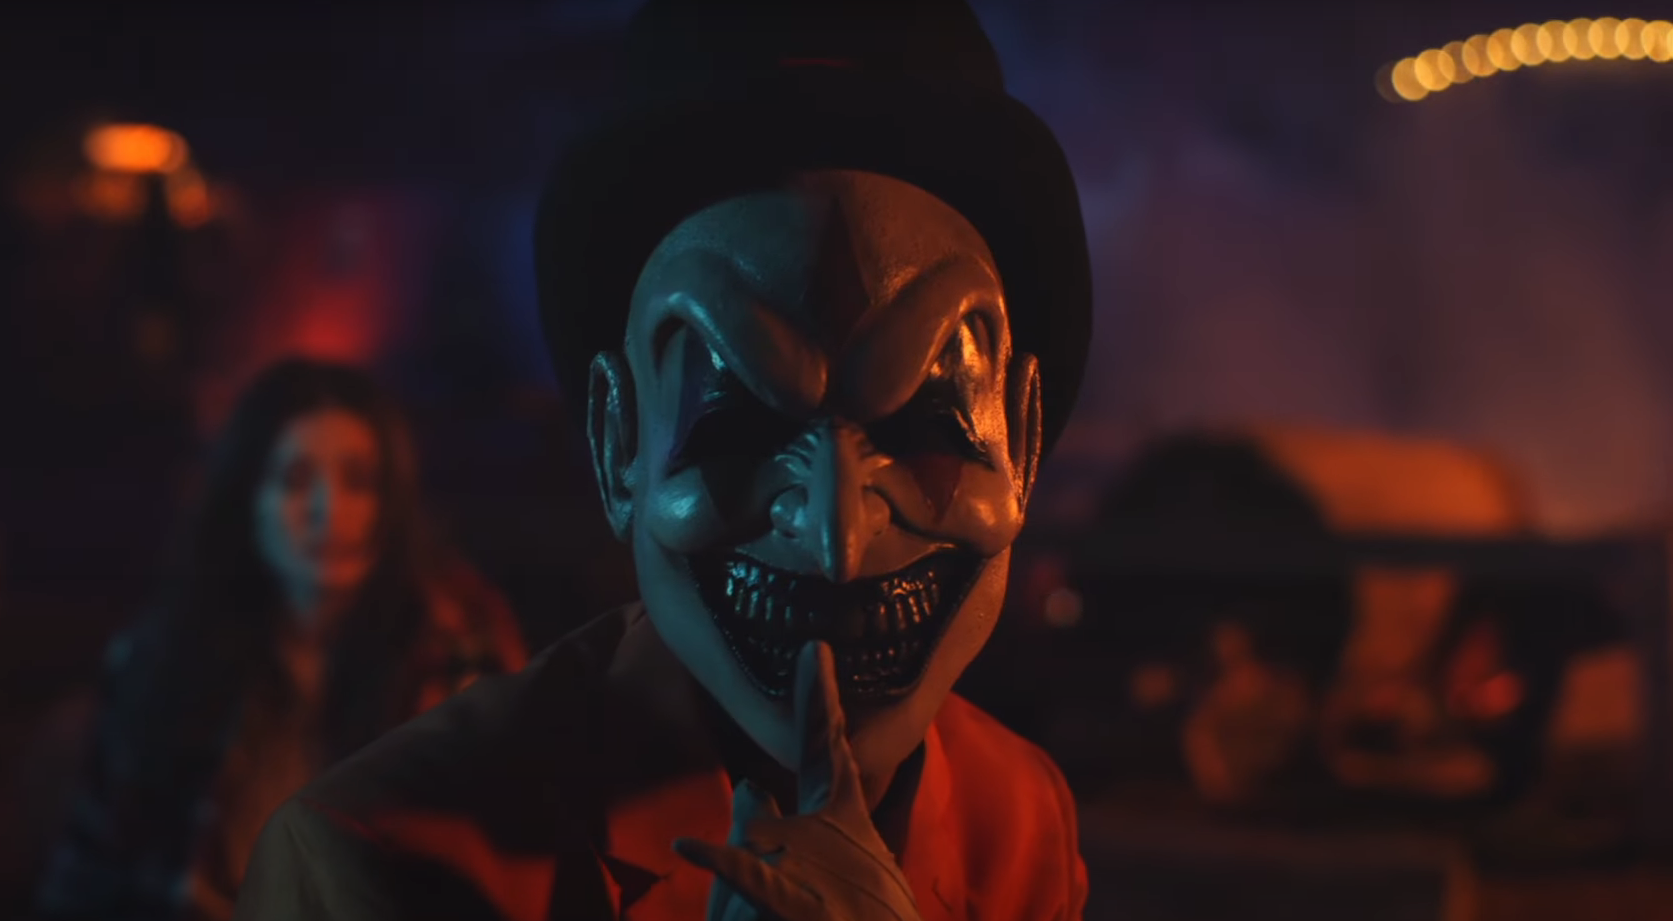 The Jester Trailer - Horror Movie Produced by Blair Witch Project Director Coming This Halloween